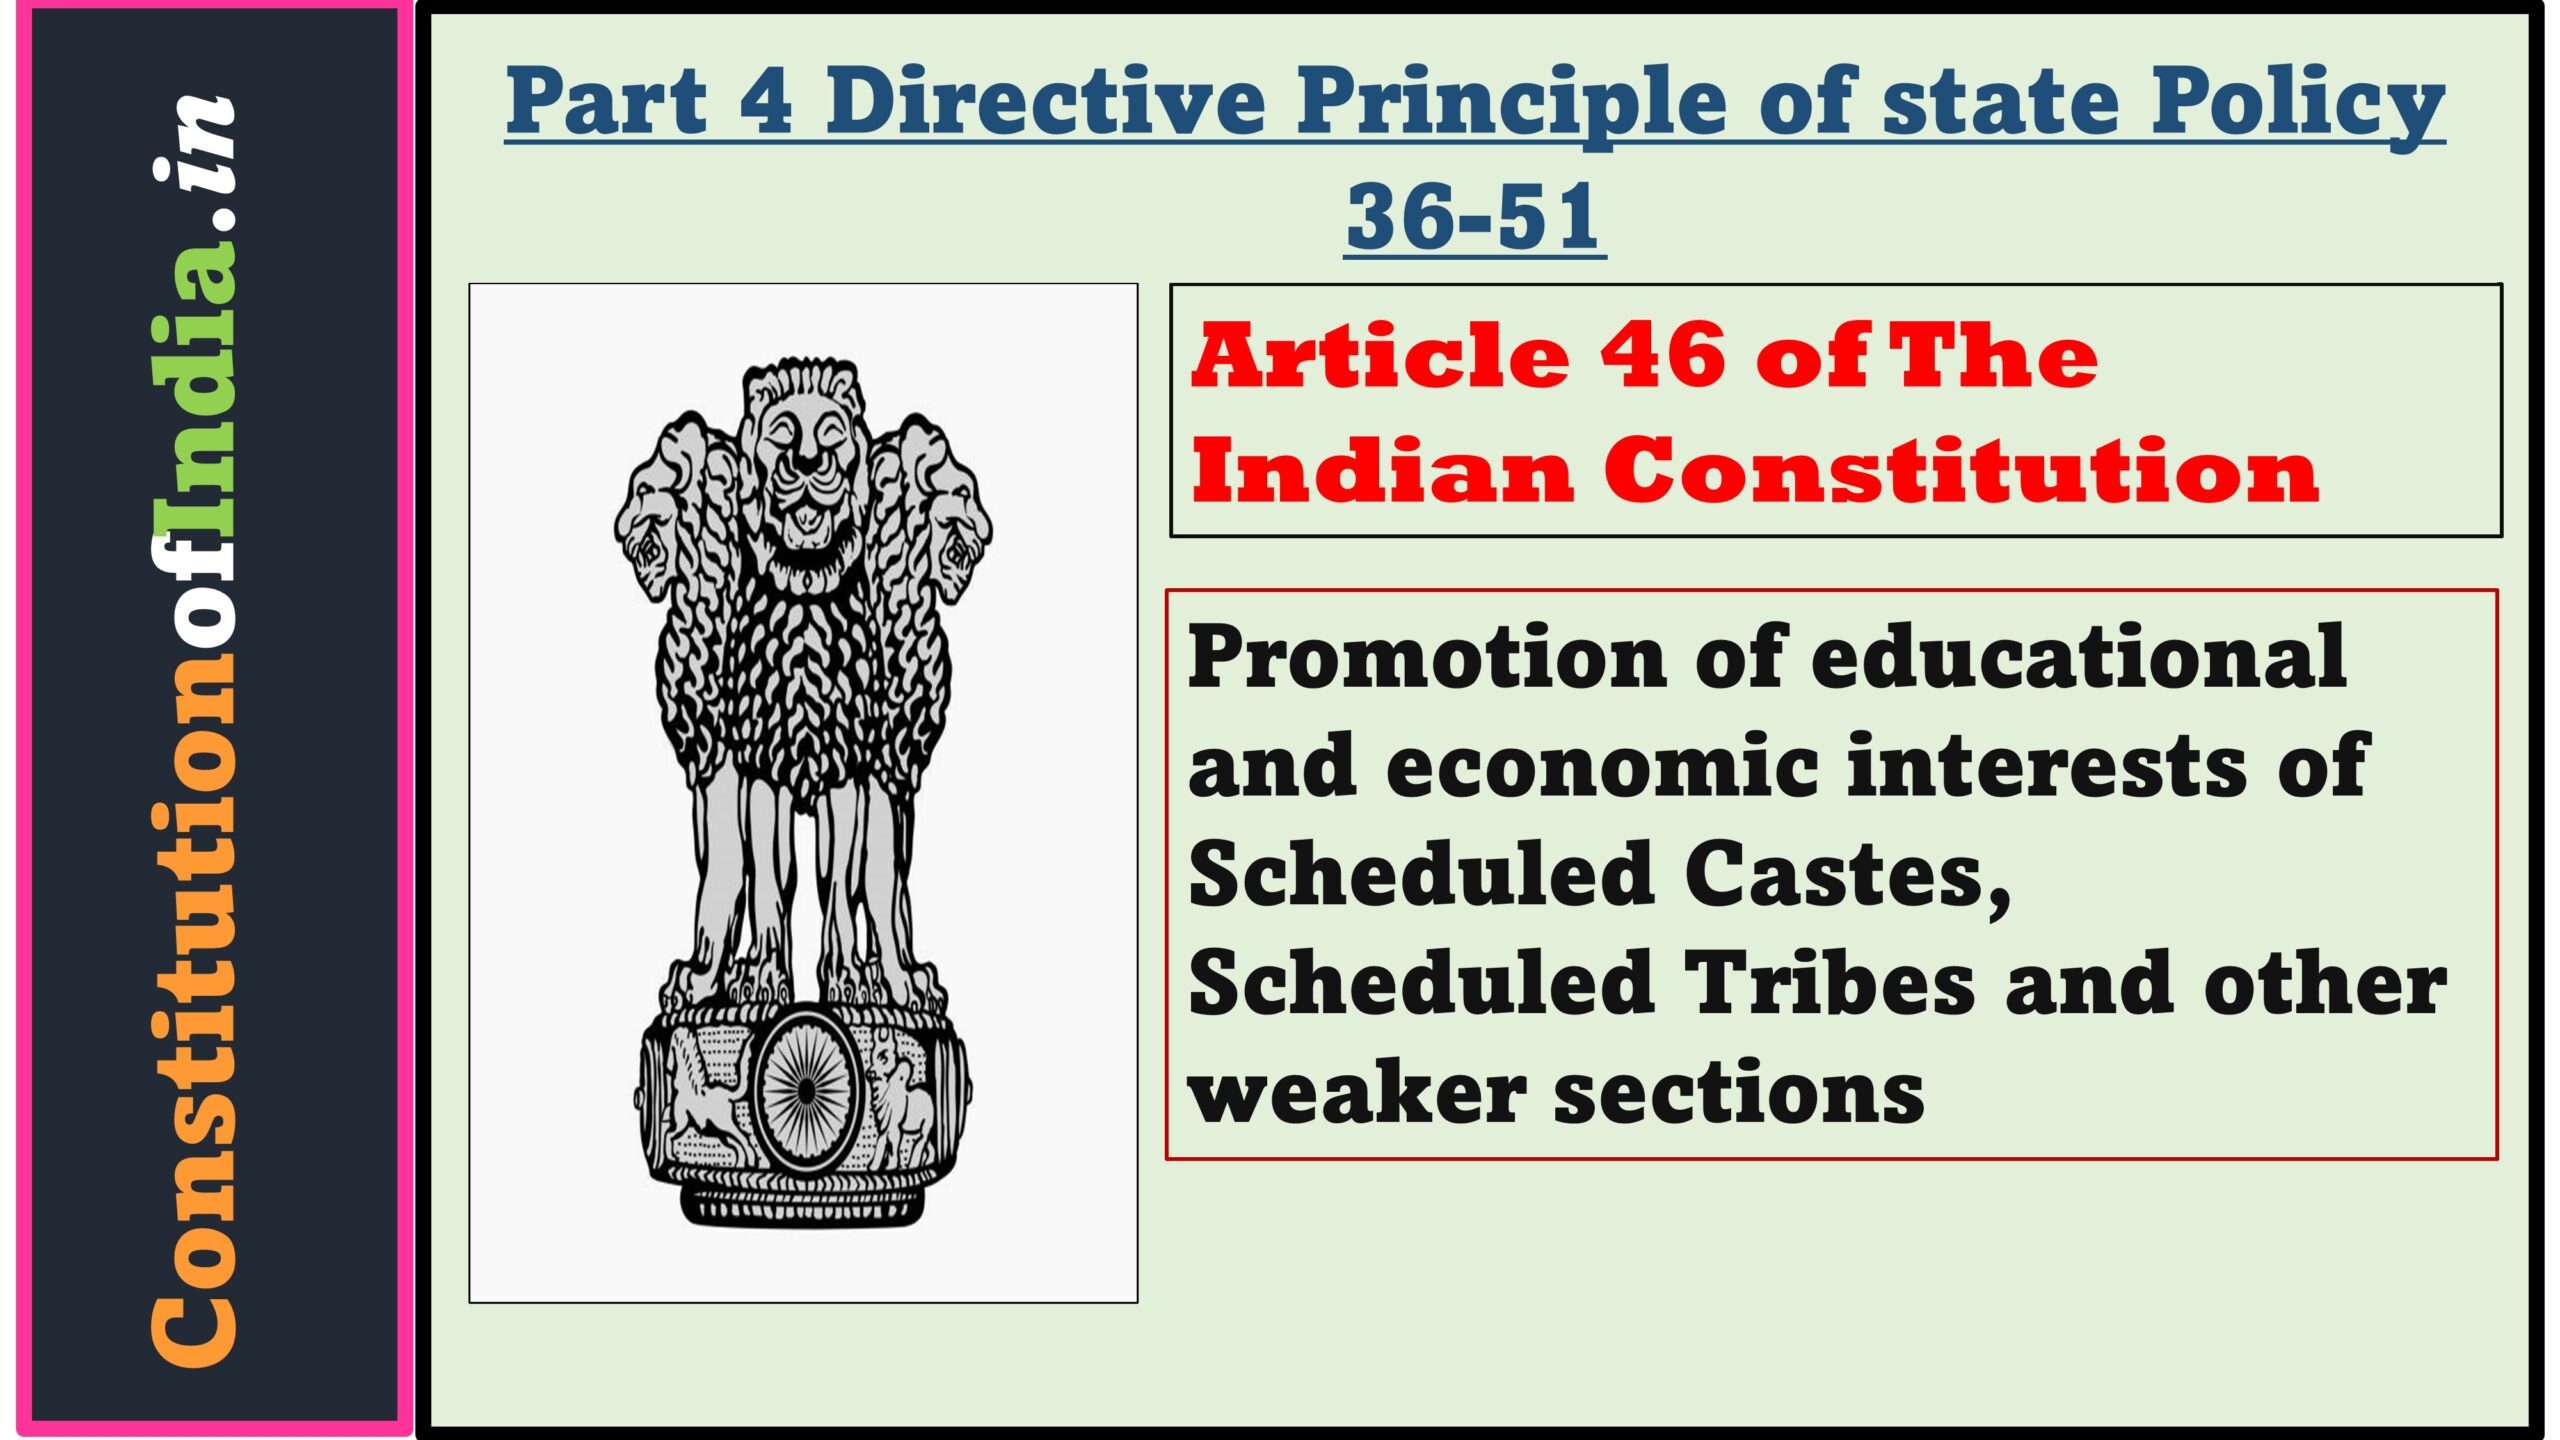 Article 46 of Indian Constitution Promotion of educational and economic interests of Scheduled Castes, Scheduled Tribes and other weaker sections.